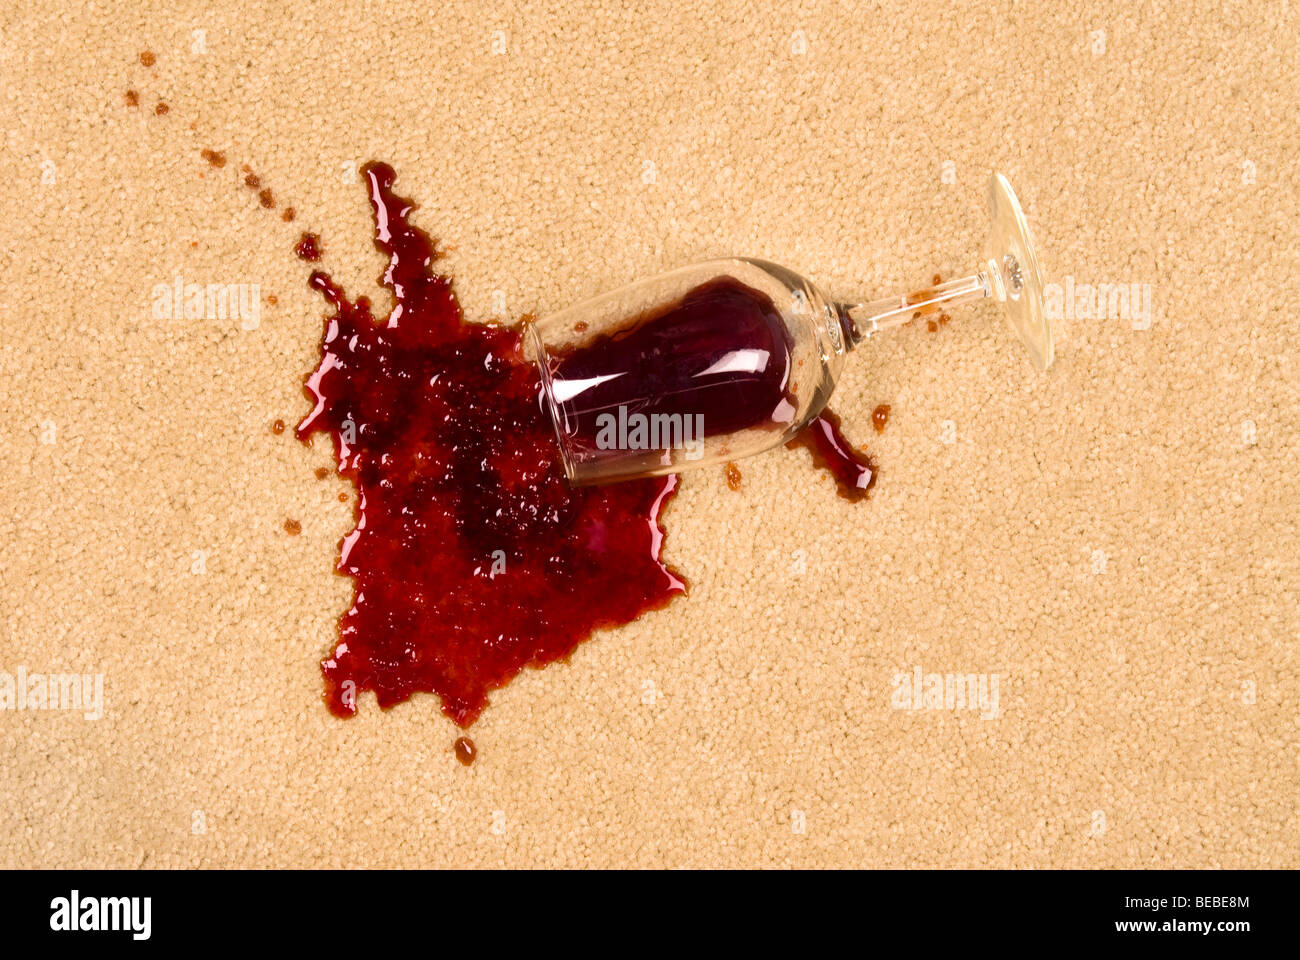 A glass of spilled wine on brand new carpet will leave a stain. Stock Photo